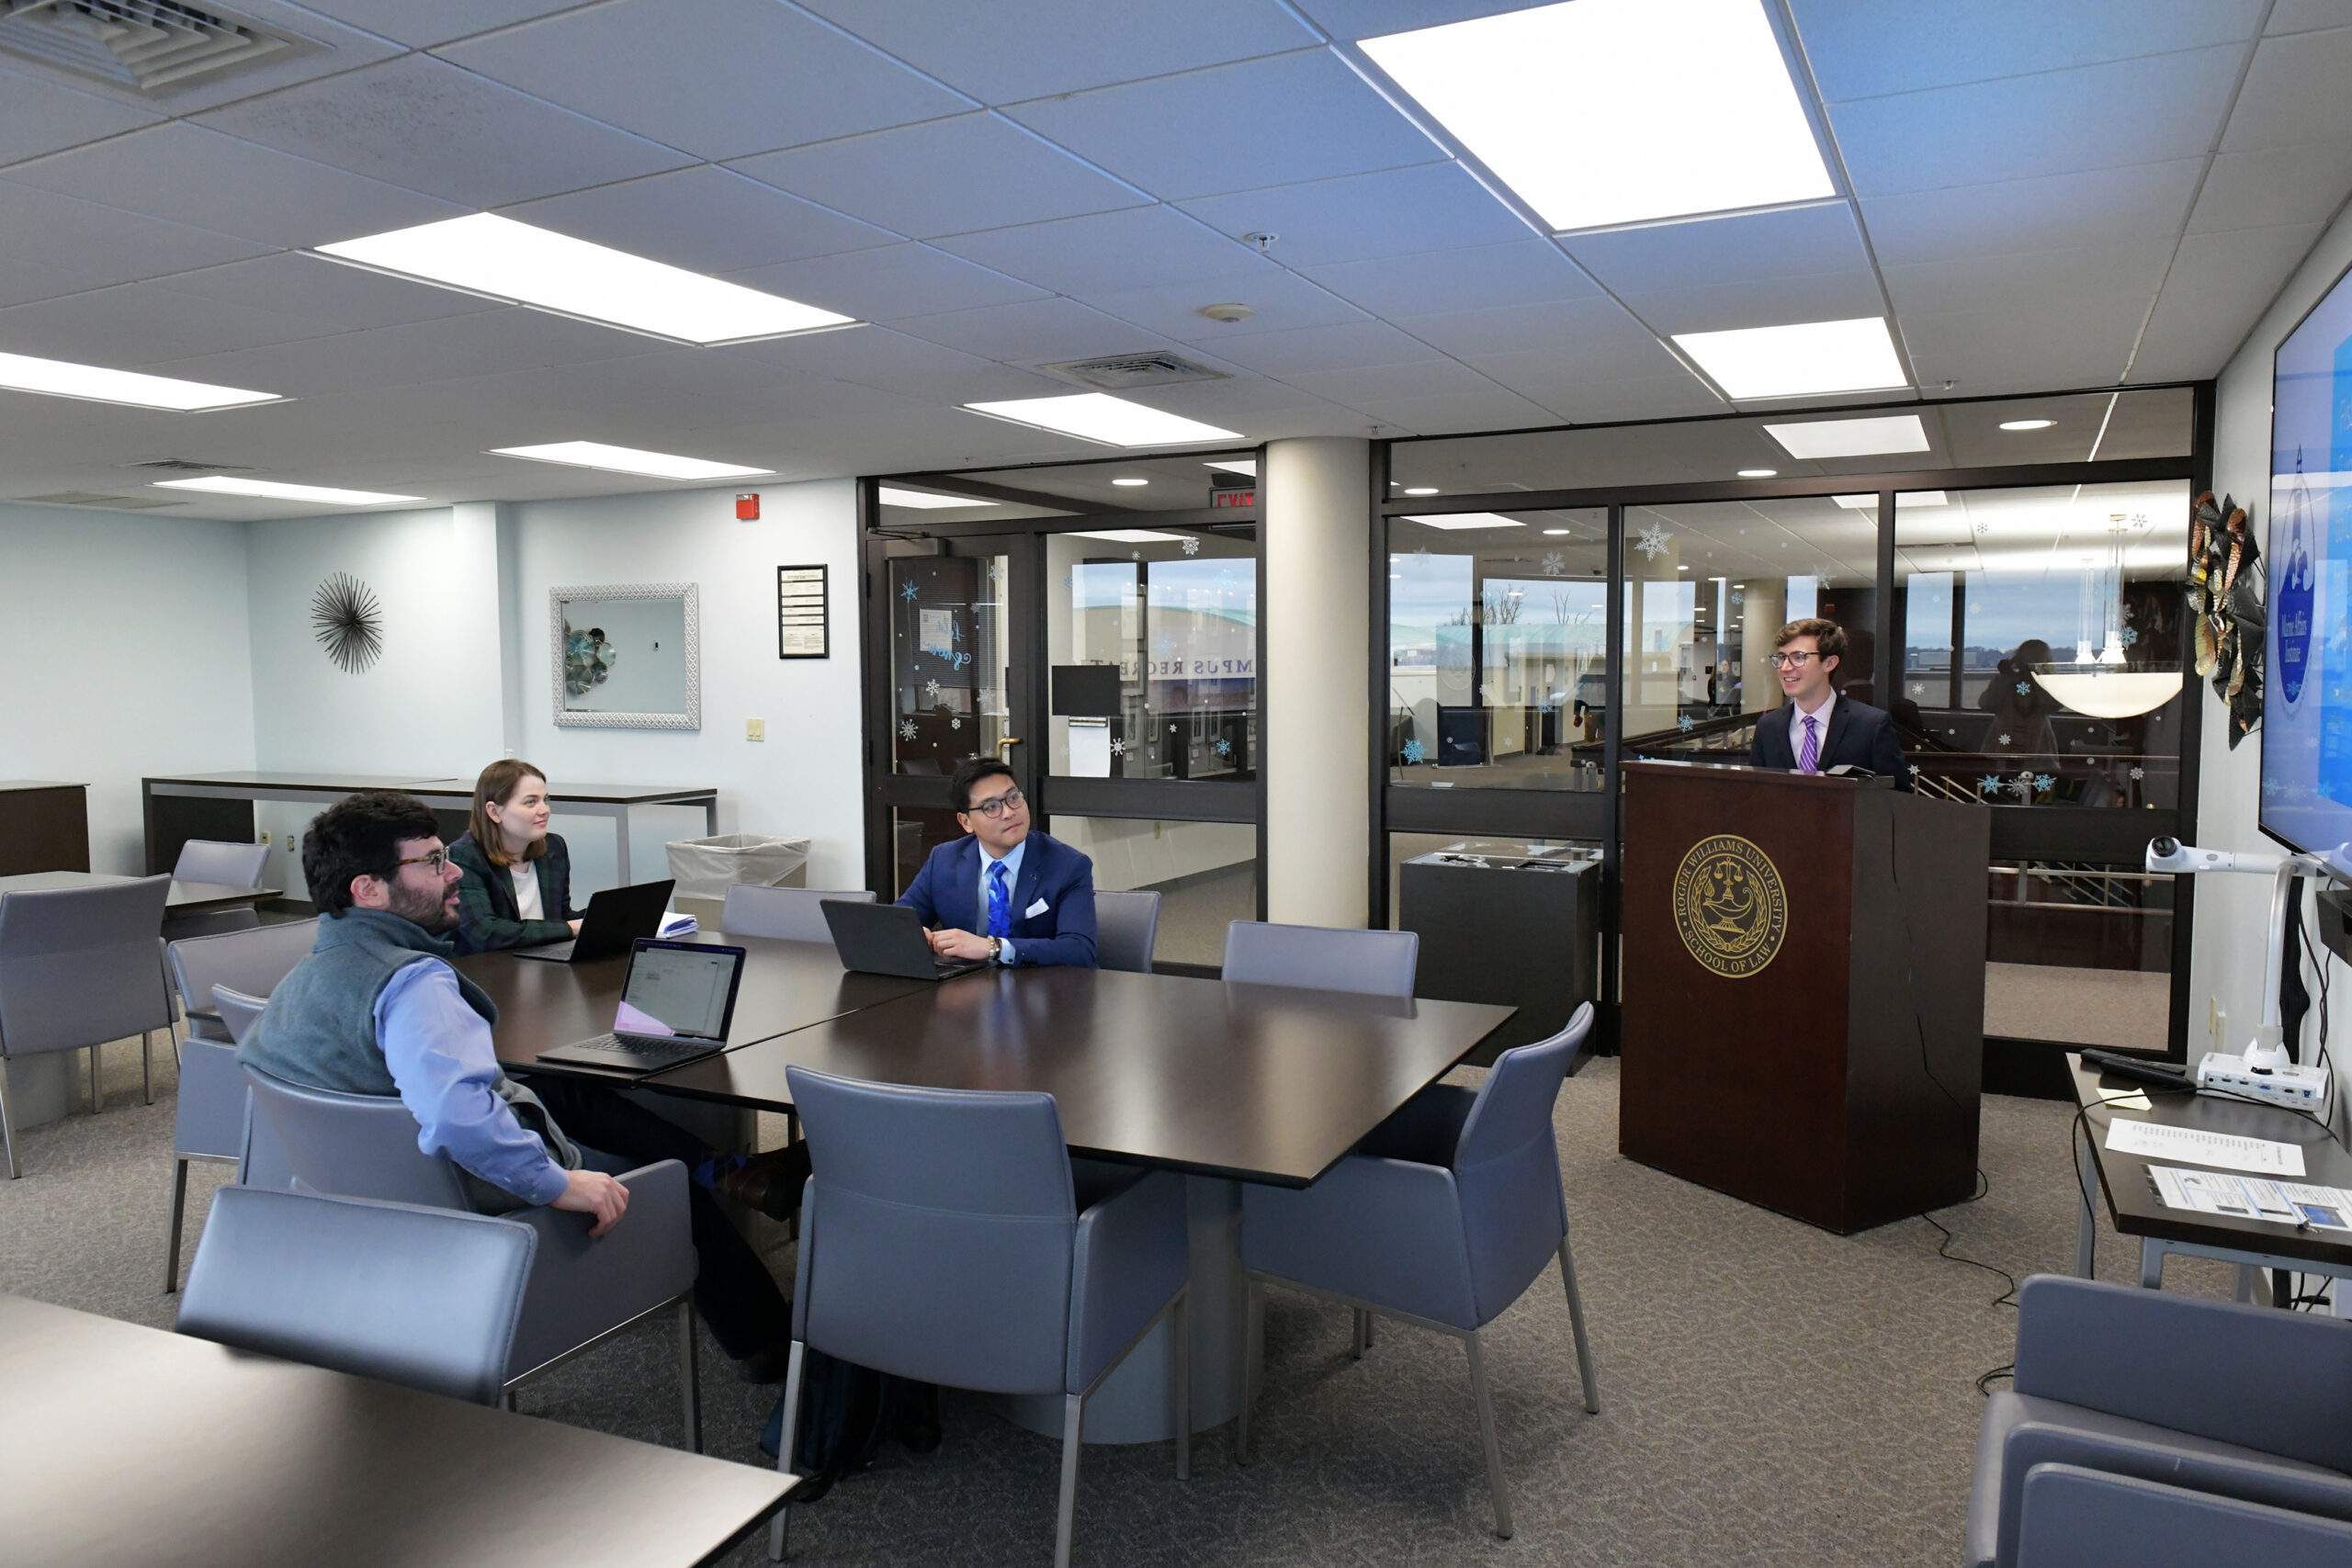 Legal program research attorney presents resarch to audience at Roger Williams University